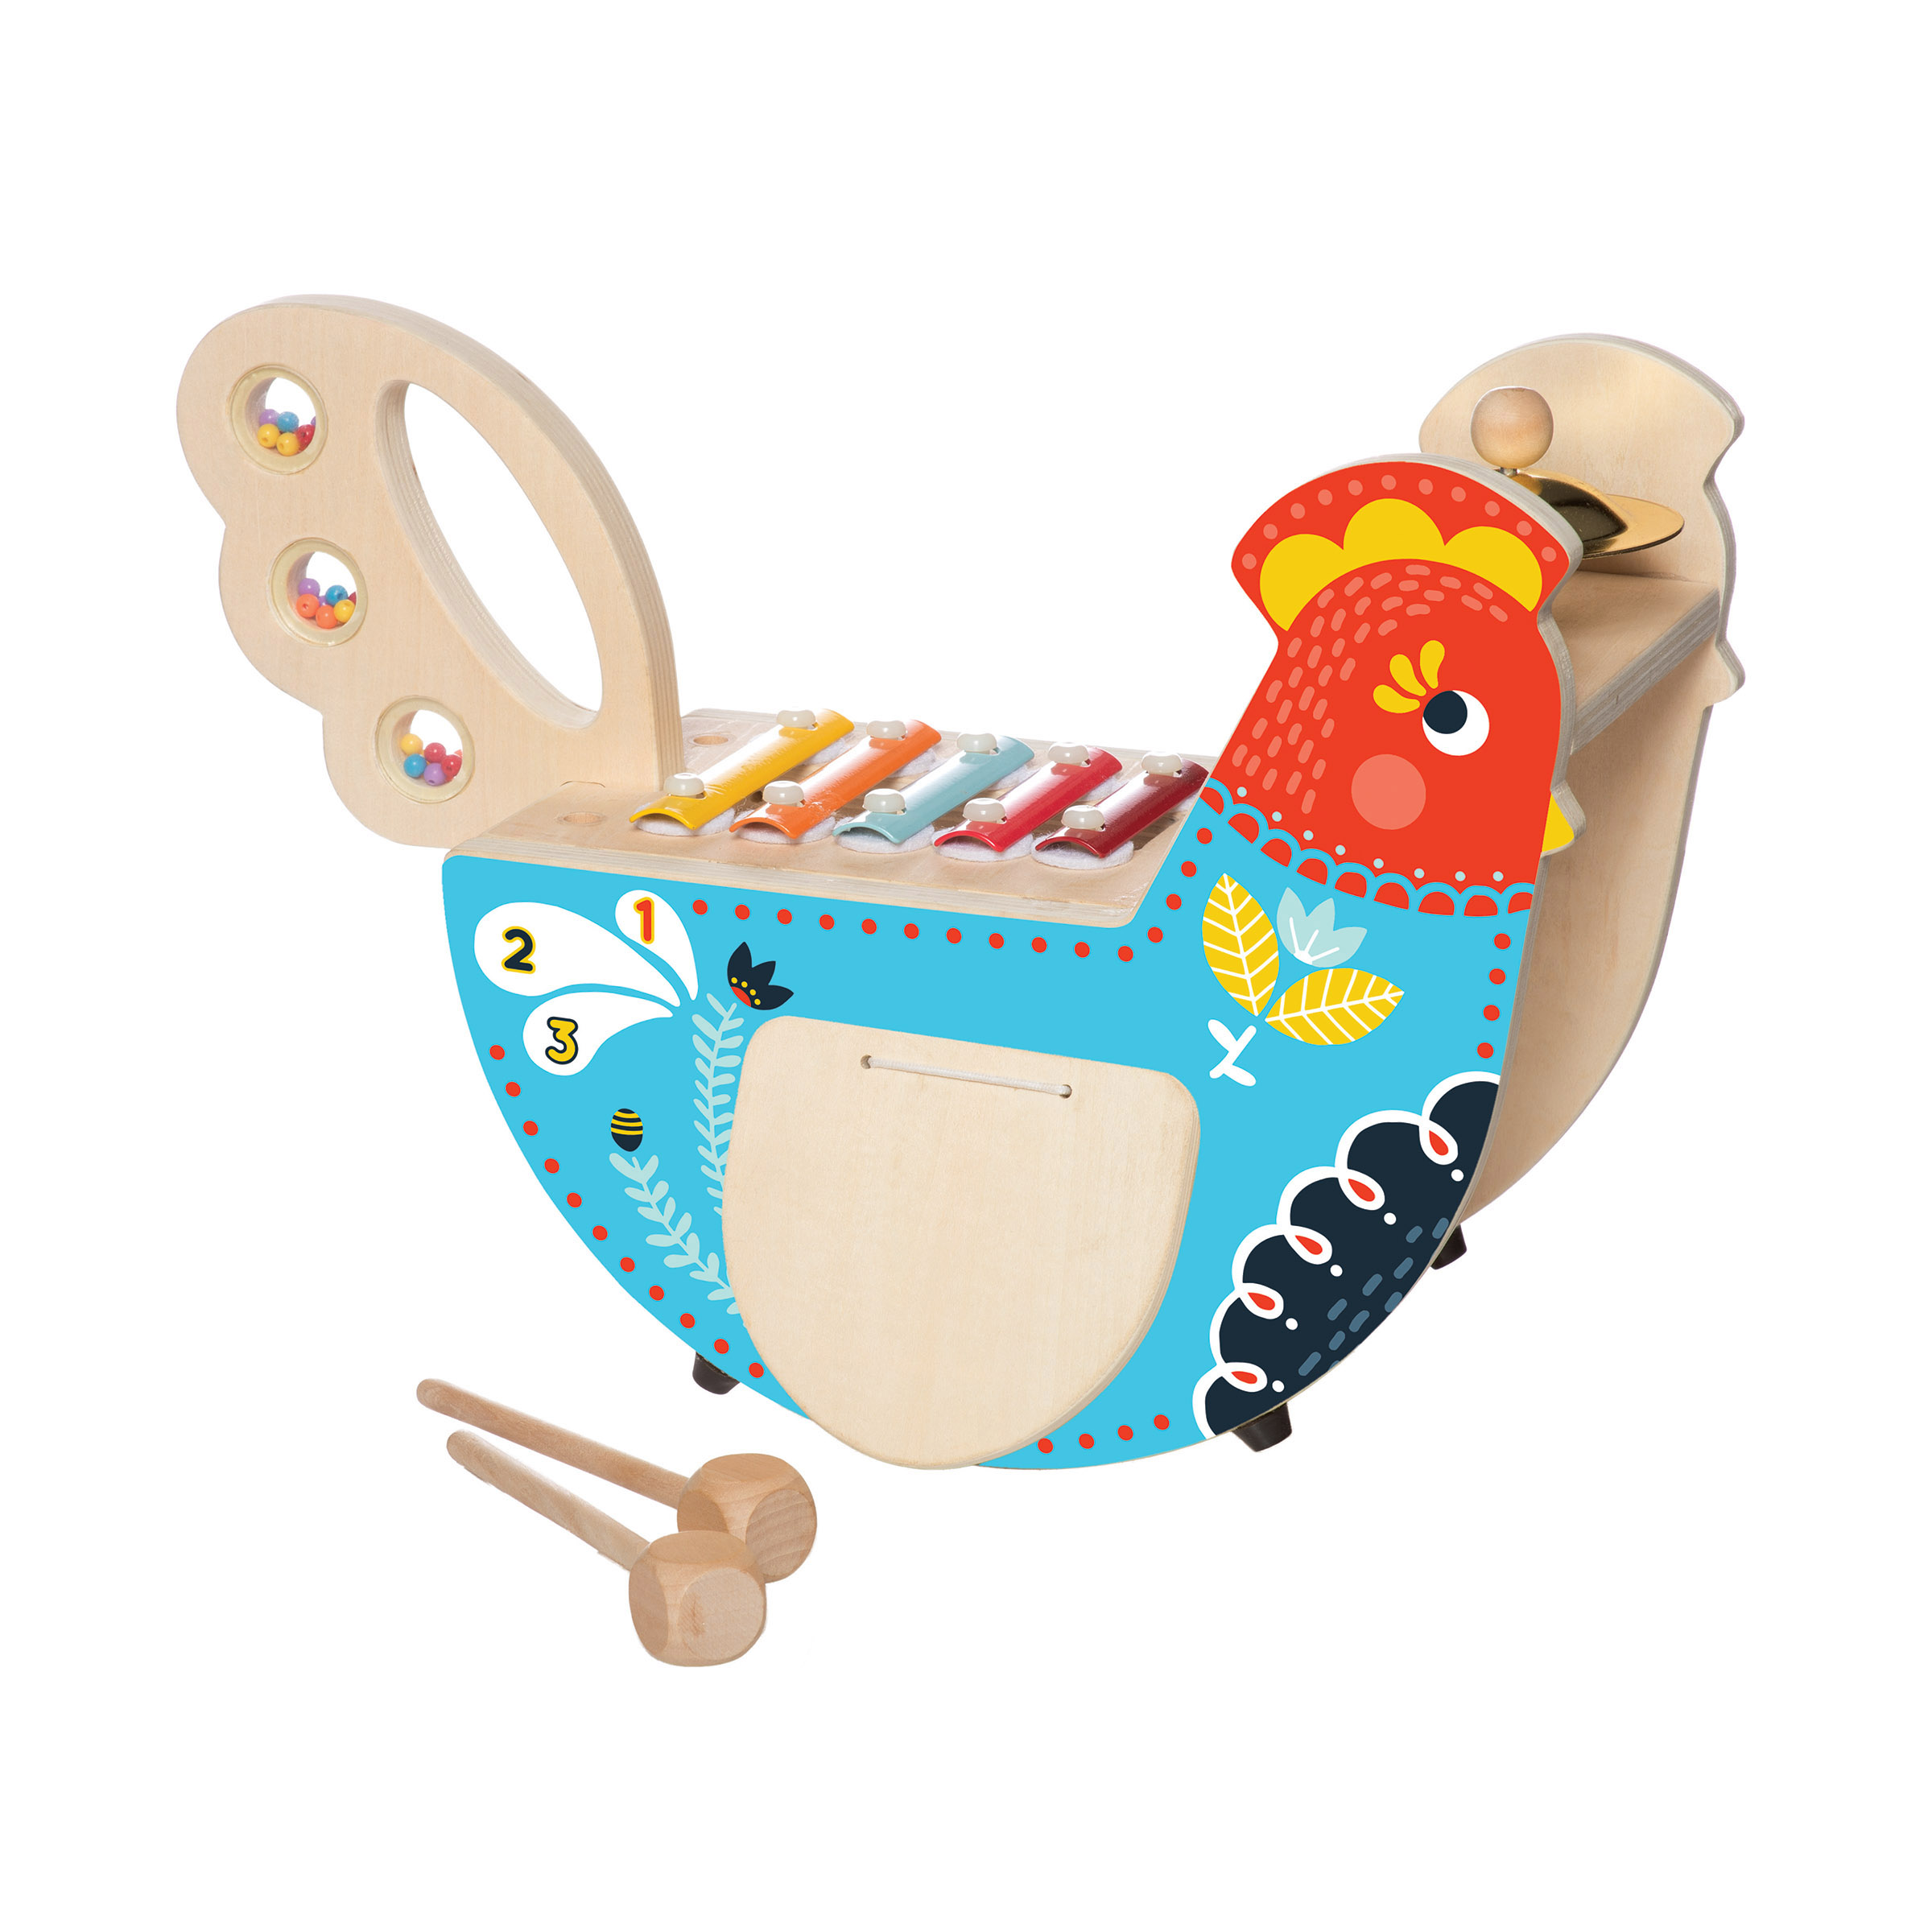 Manhattan Toy Musical Chicken Wooden Instrument for Toddlers with Xylophone, Drumsticks, Cymbal and Maraca - image 1 of 9